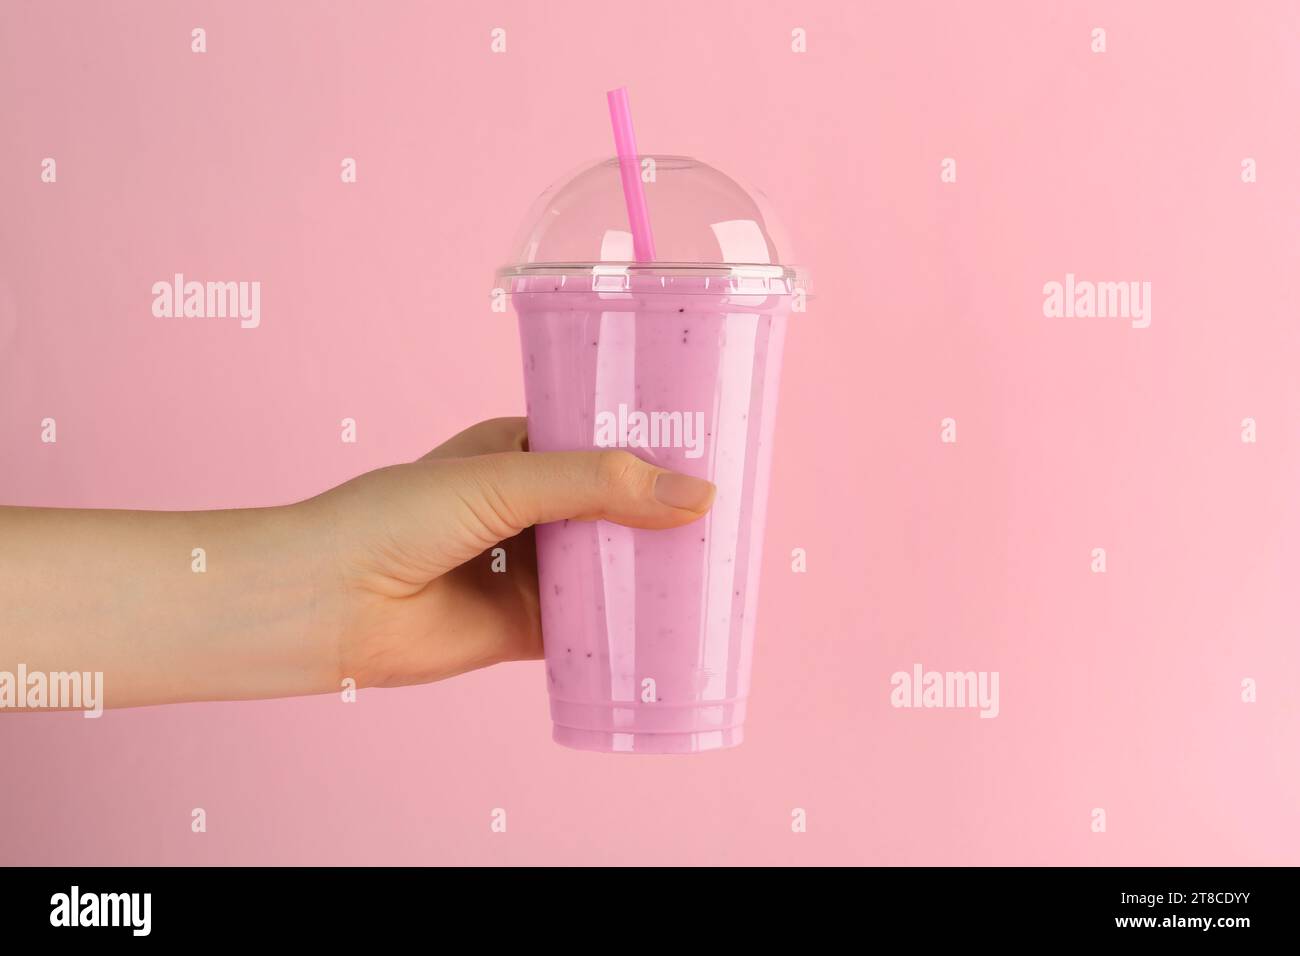 https://c8.alamy.com/comp/2T8CDYY/woman-with-plastic-cup-of-tasty-smoothie-on-pink-background-closeup-2T8CDYY.jpg